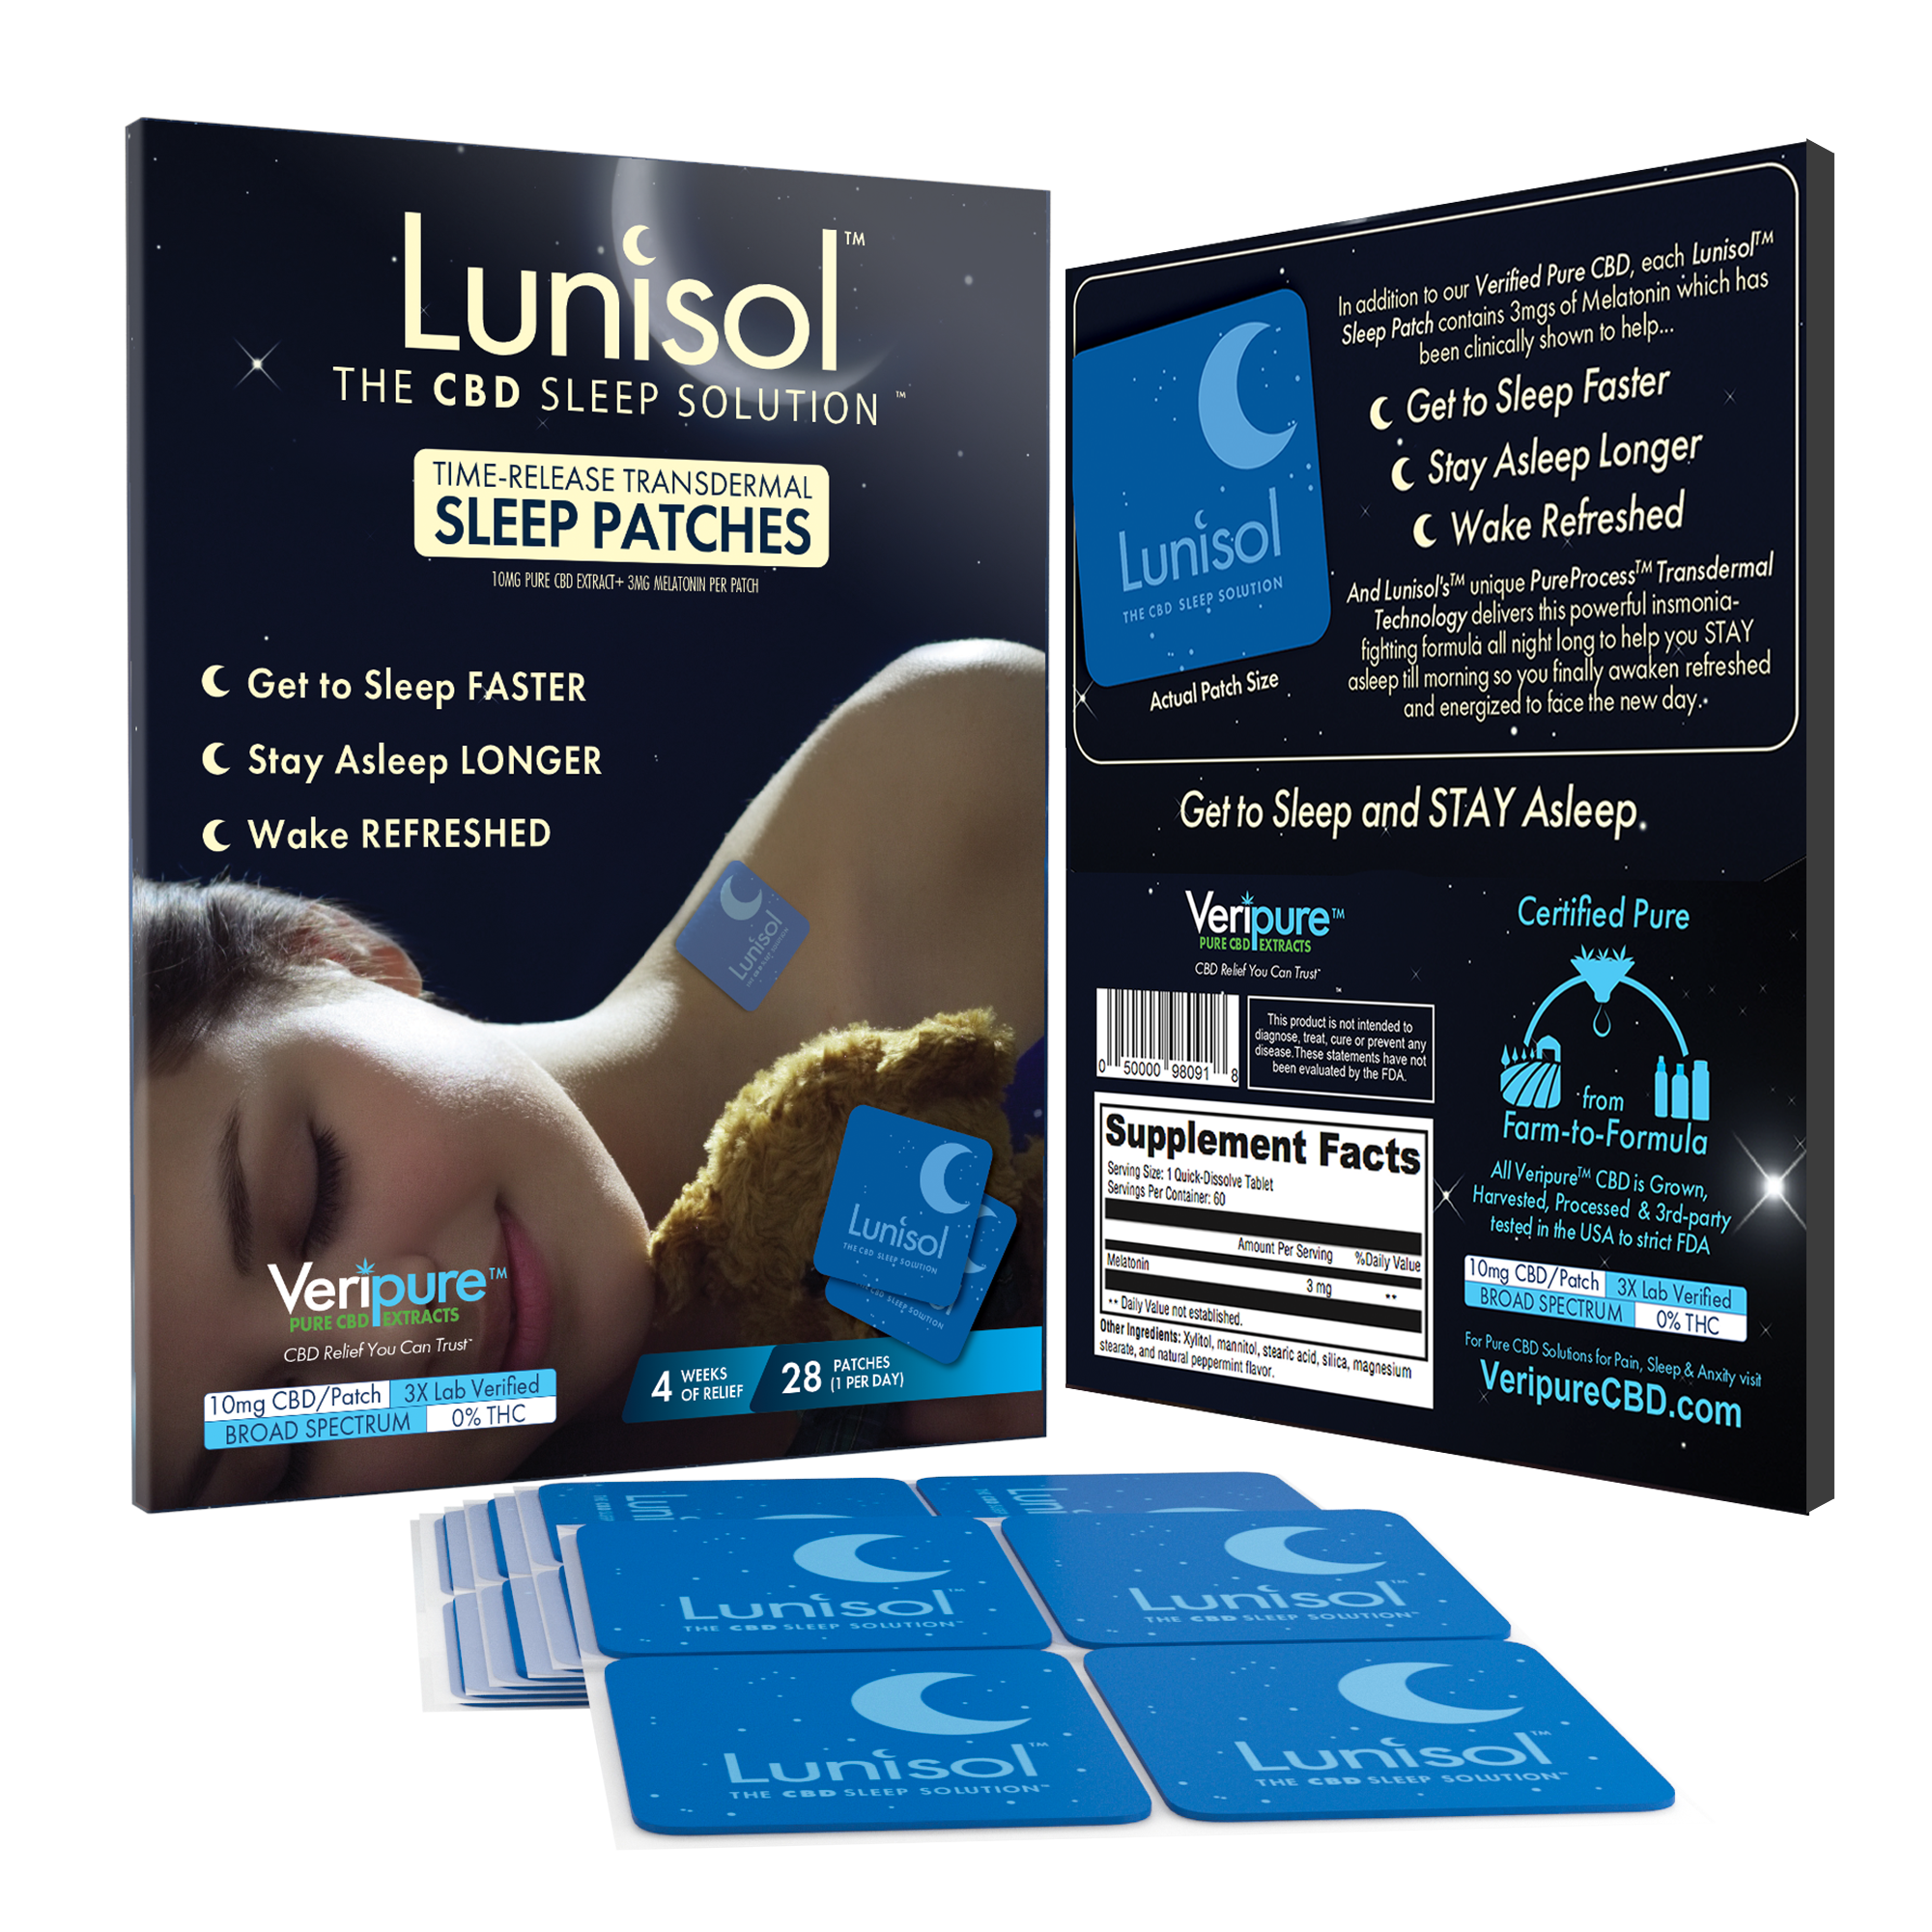 2nd Pack of Lunisol Patches (Just pay separate 5.99 P&W fee)